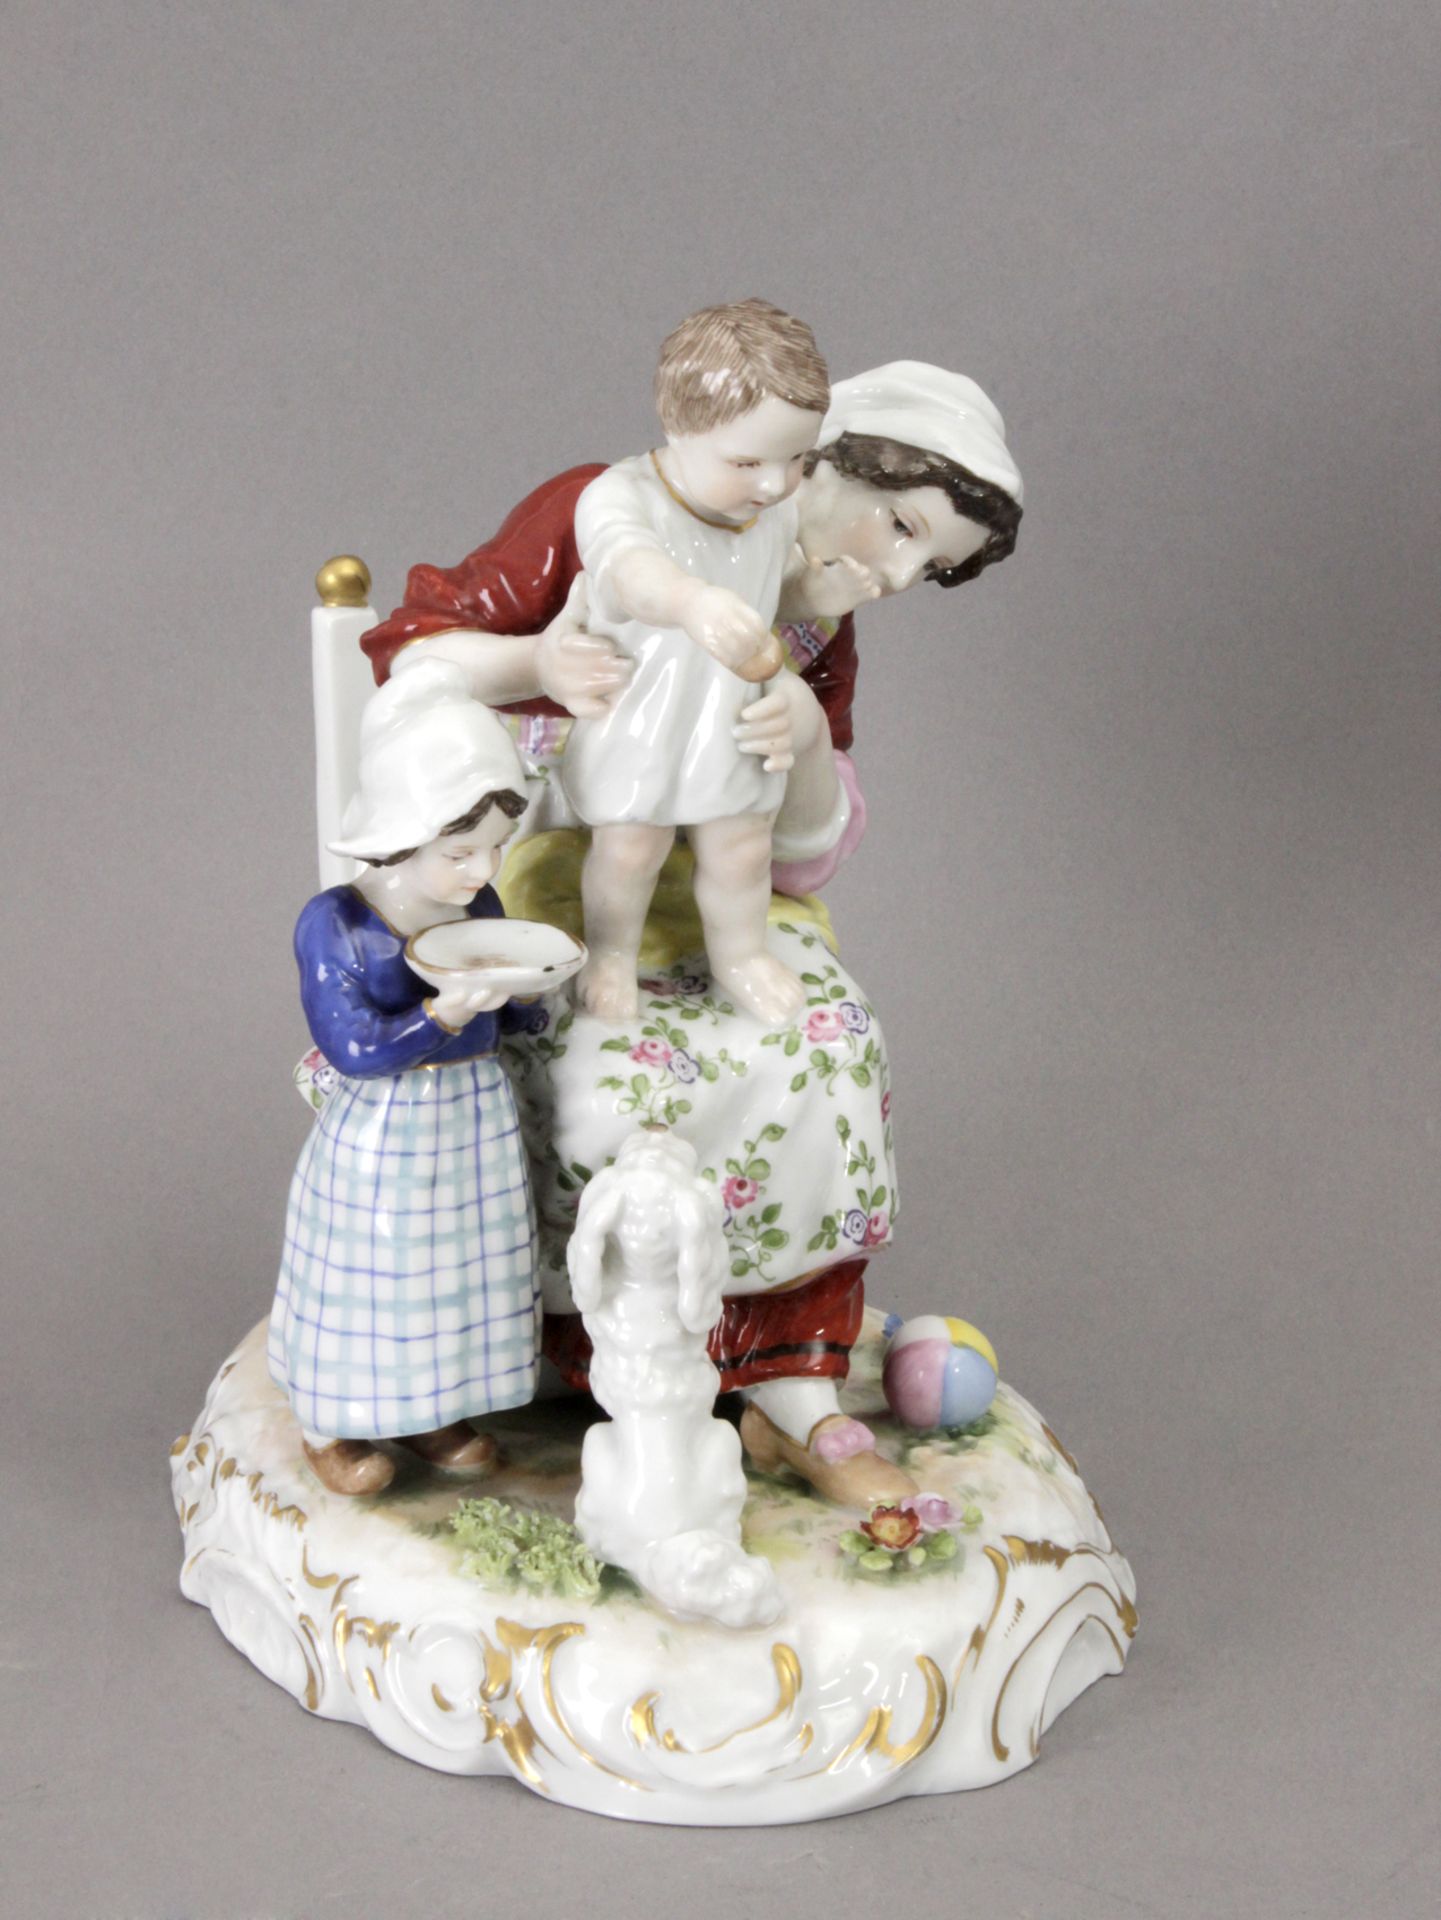 Early 20th century group of figurines in German porcelain